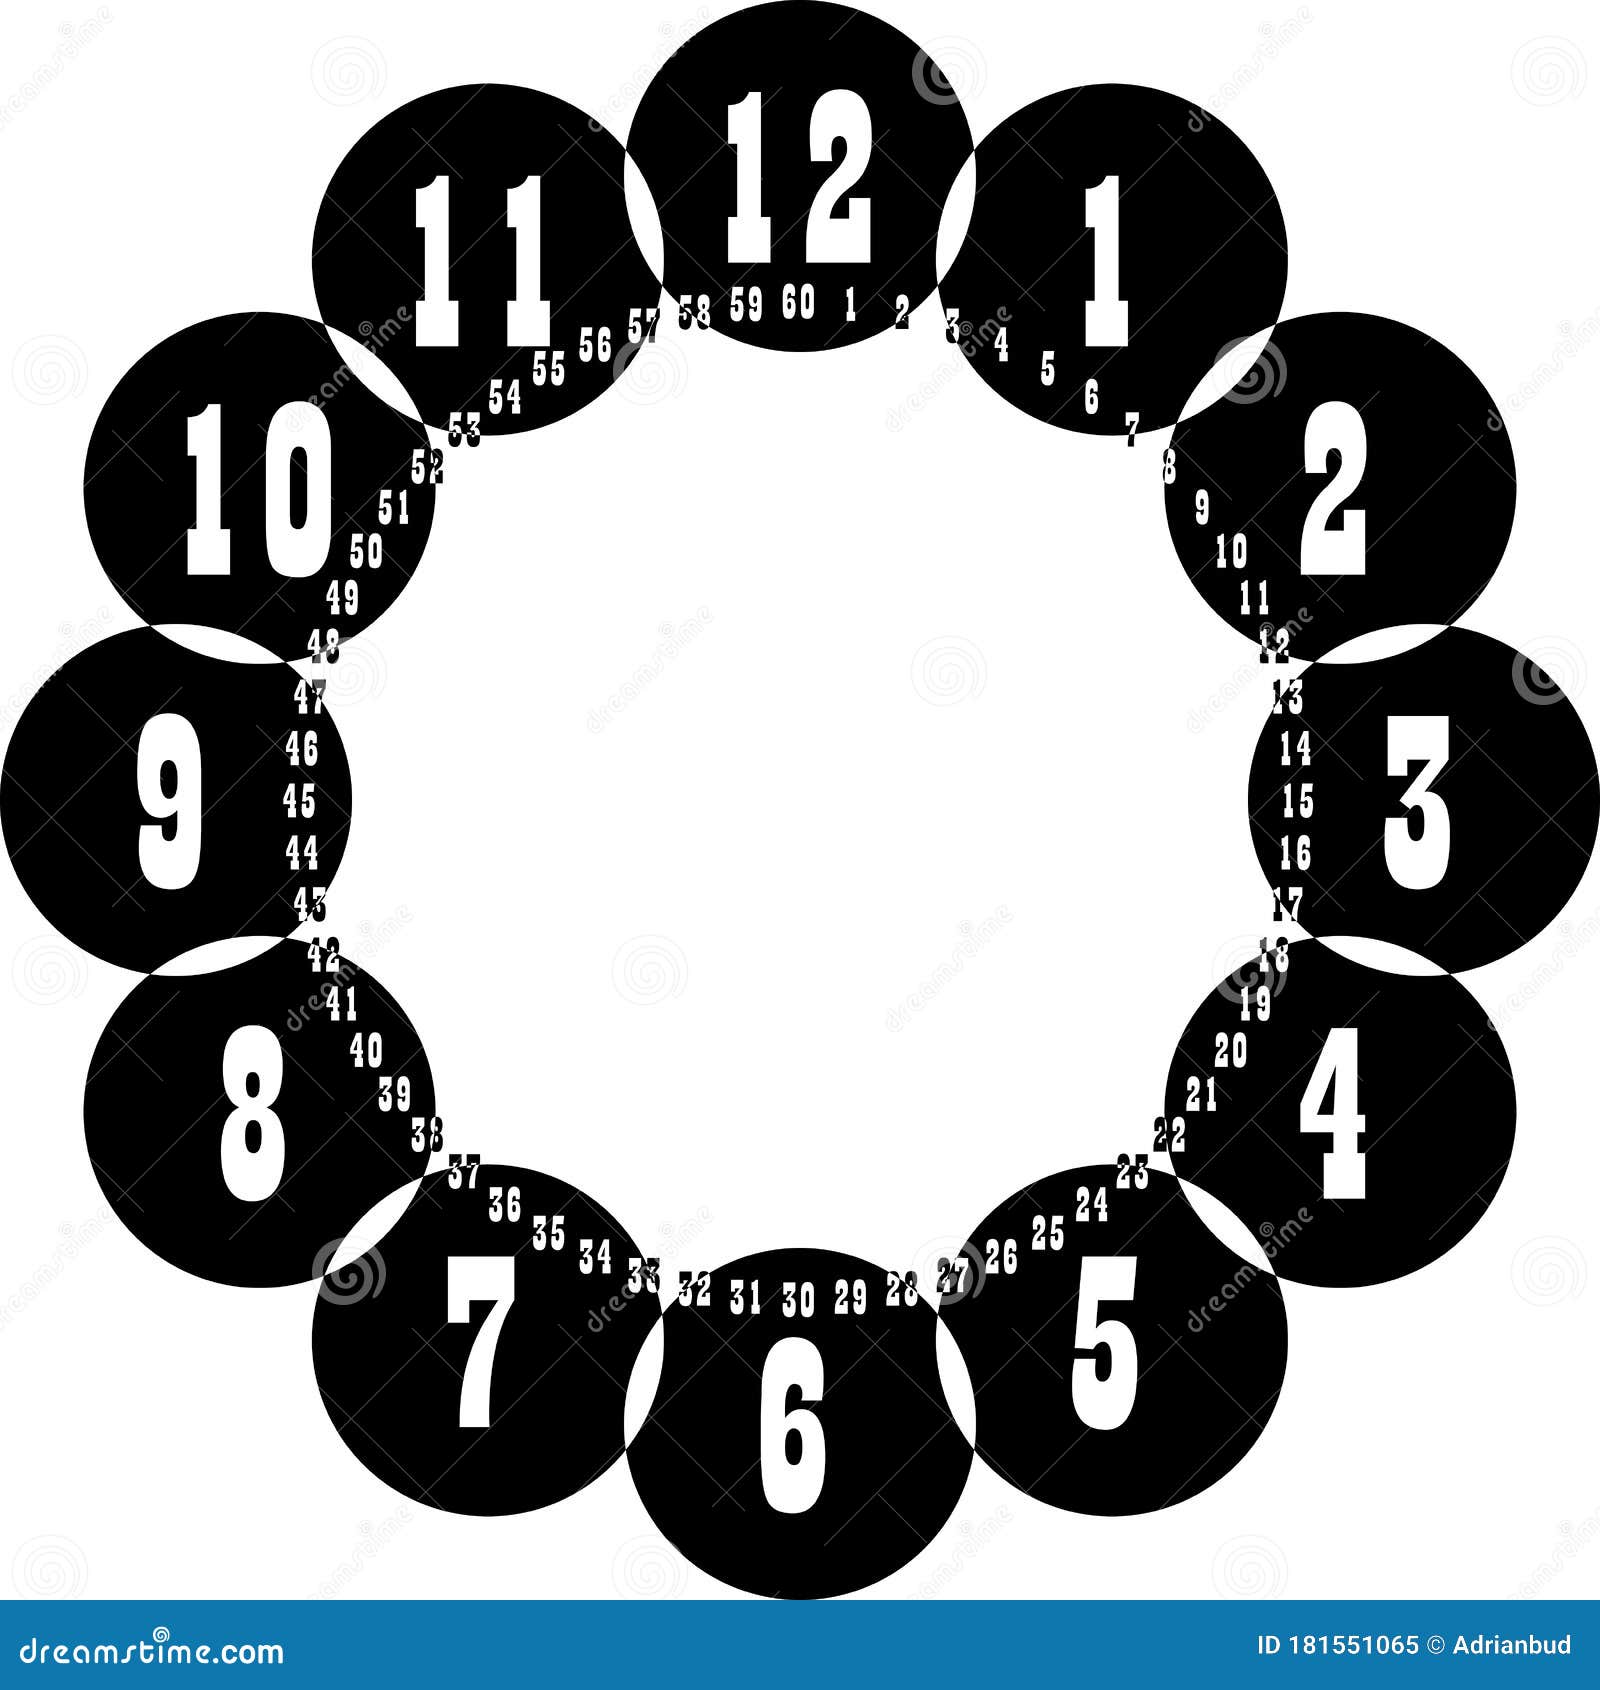 clock dial gigantesque negative space numbers hourly on black circle game intersected with small circle of seconds on transparent